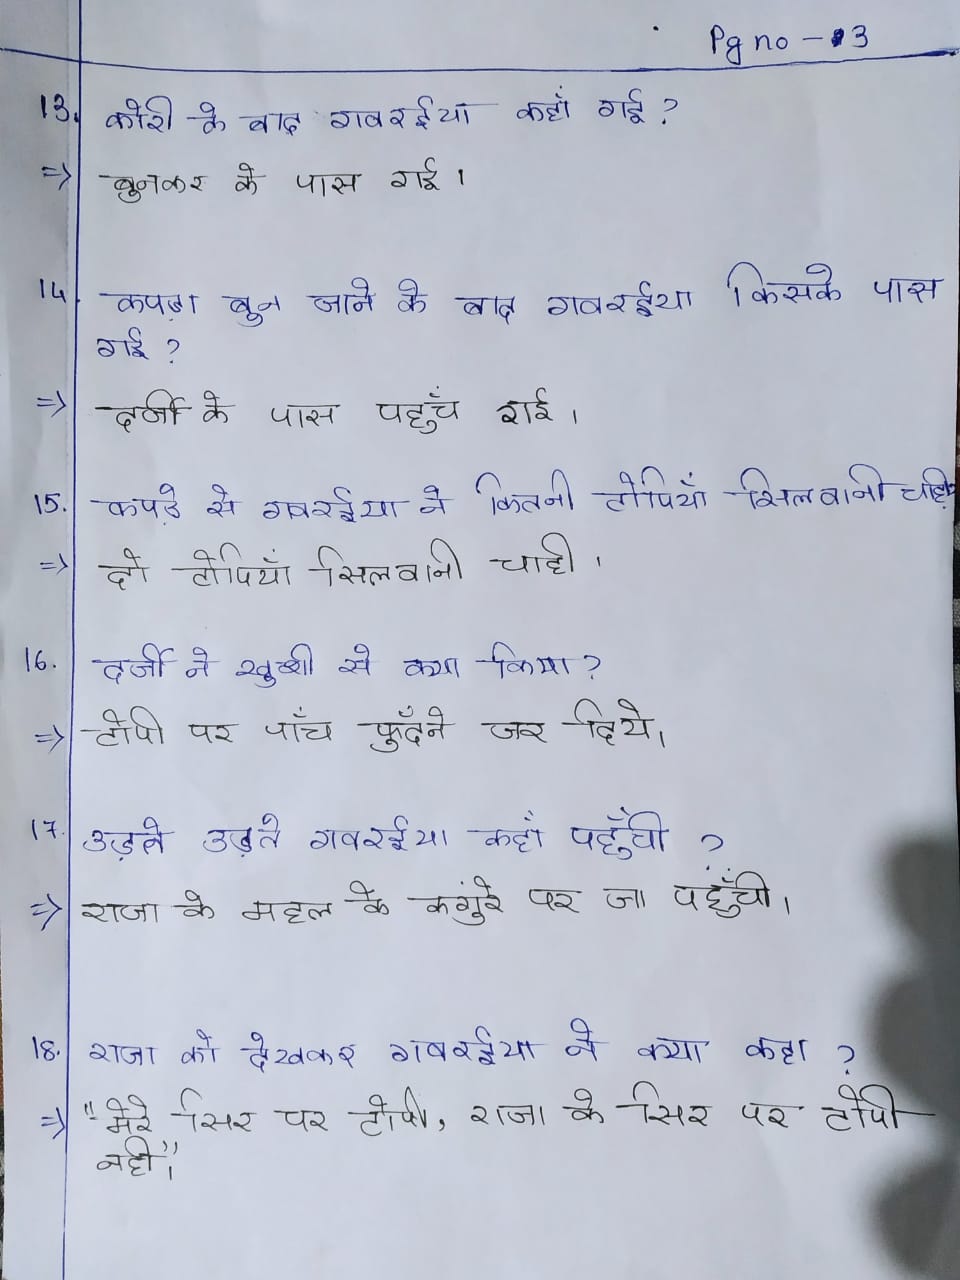 topi-extra-questions-and-answers-class-8-hindi-chapter-18-ashad-ka-pehla-din-extra-questions